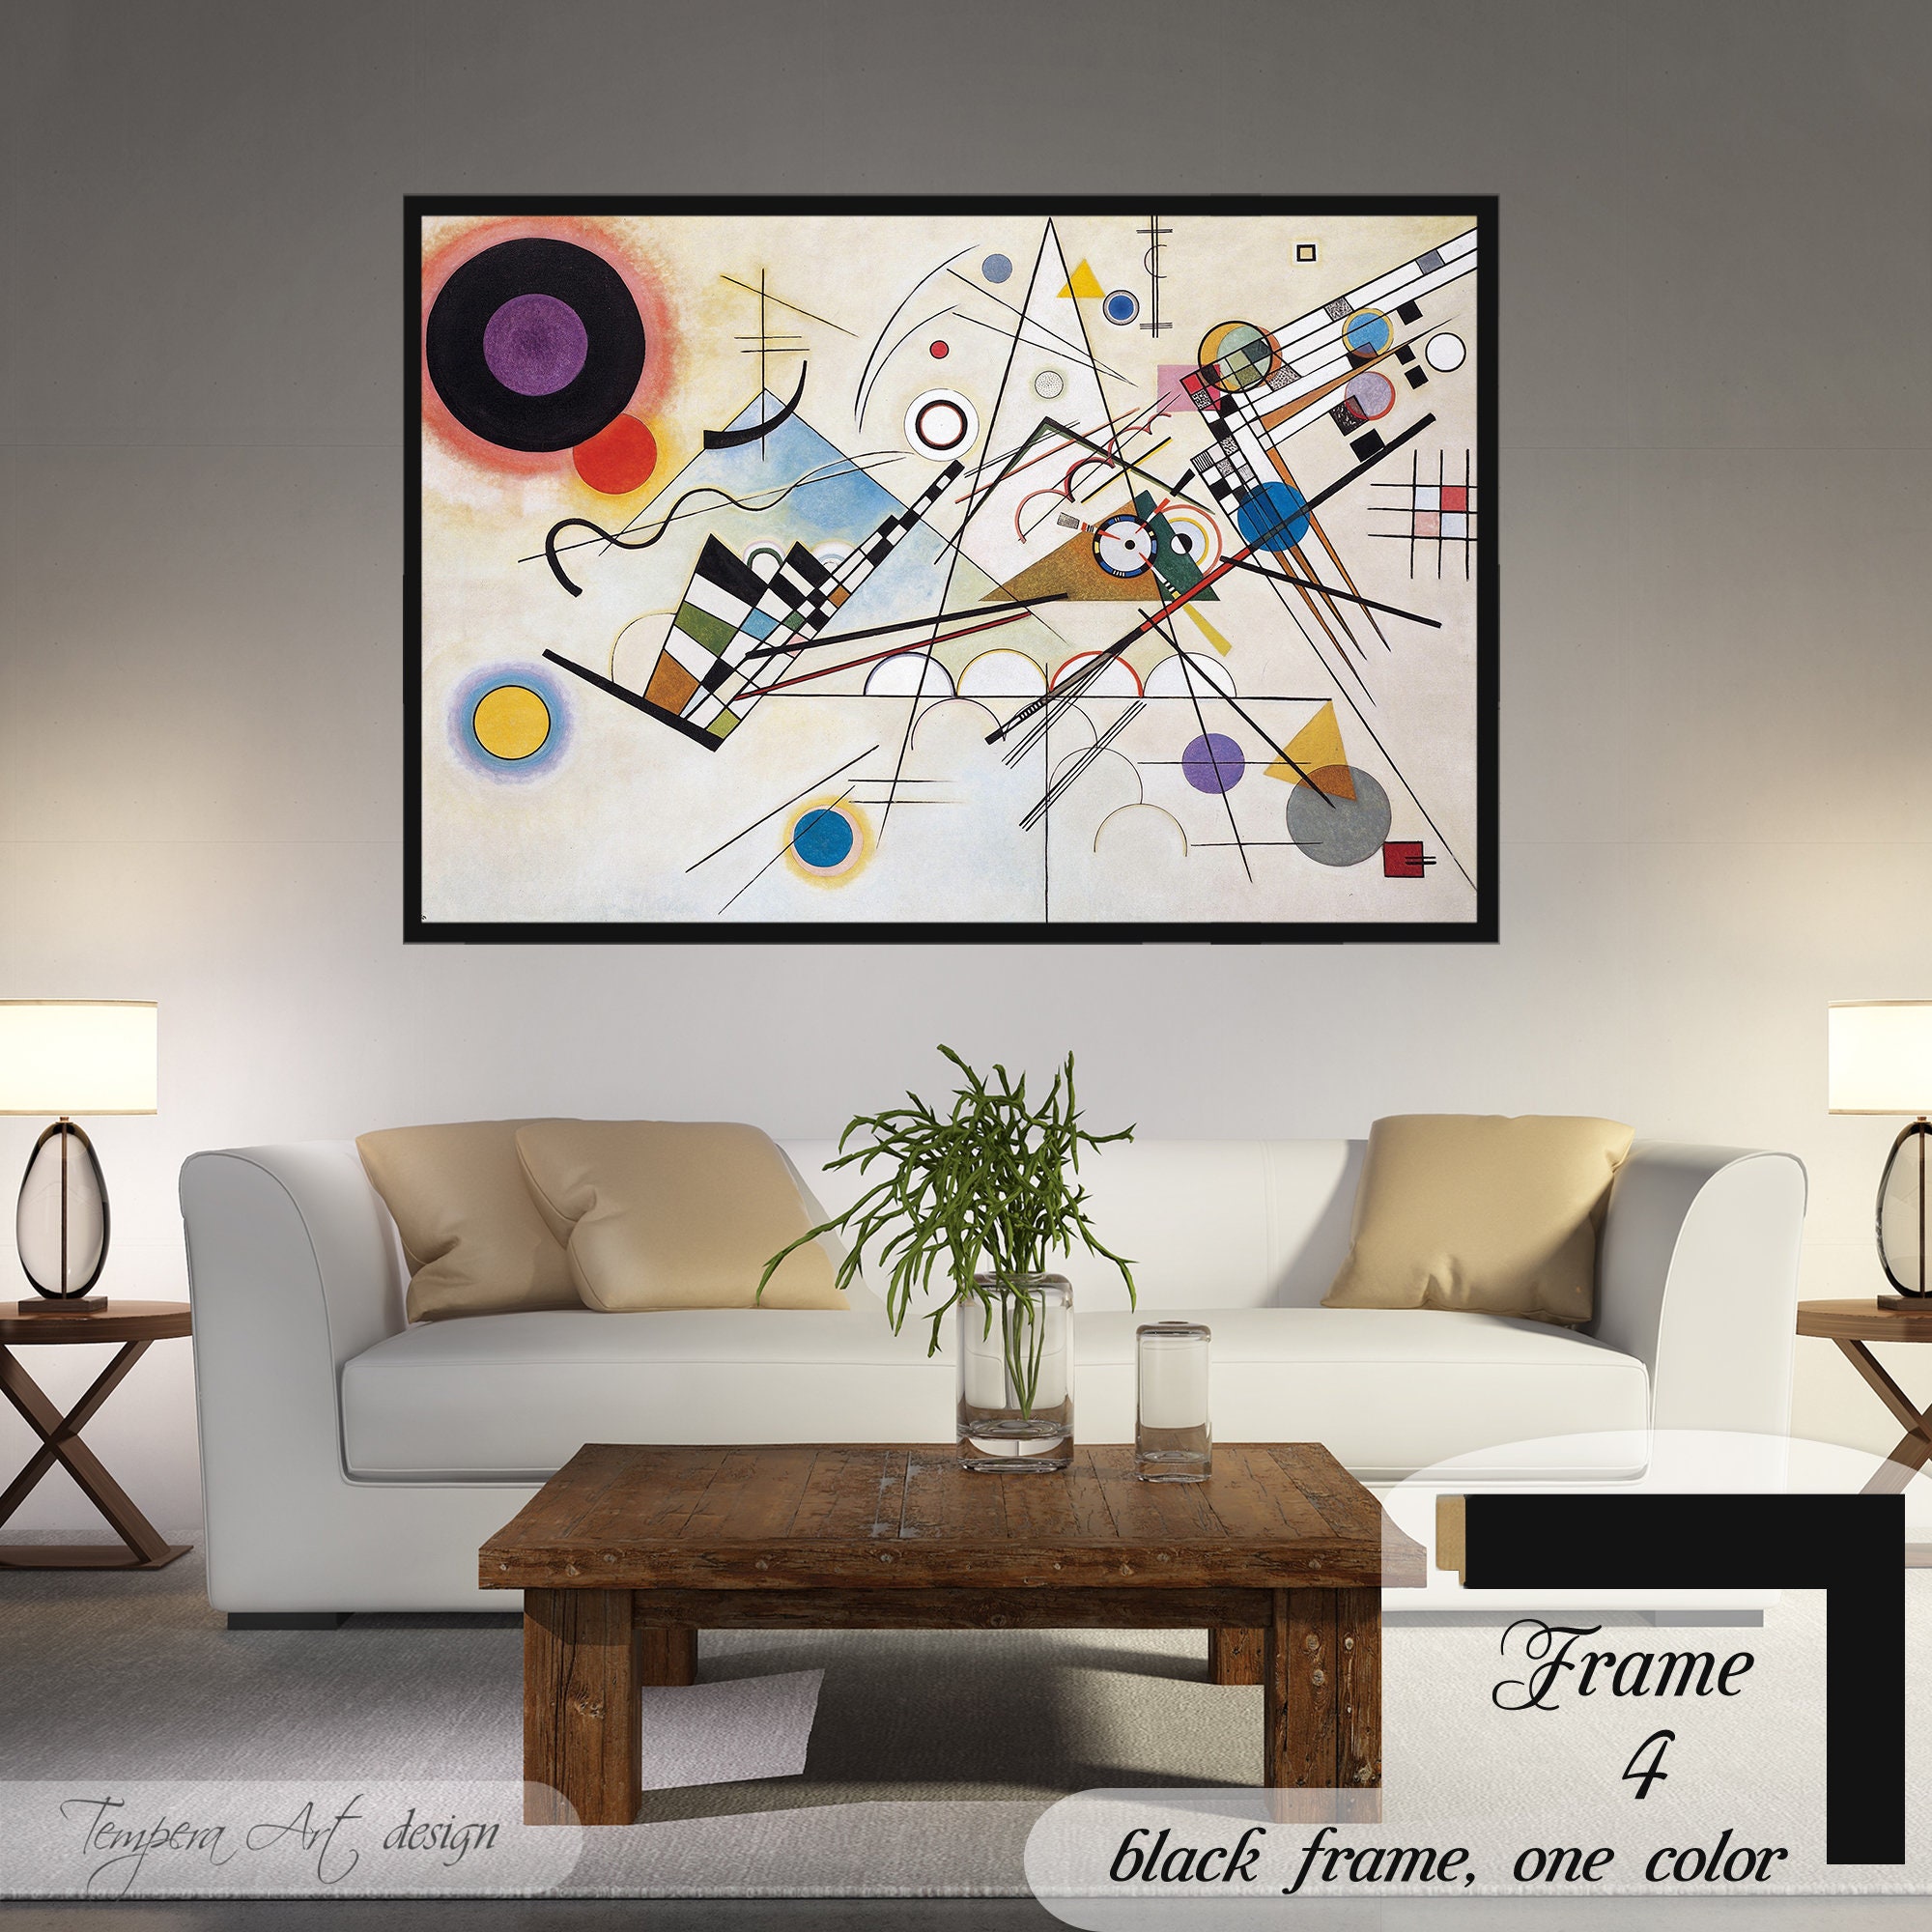 Abstract Composition 8 By Wassily Kandinsky Wall Art Poster Home Decor Print 